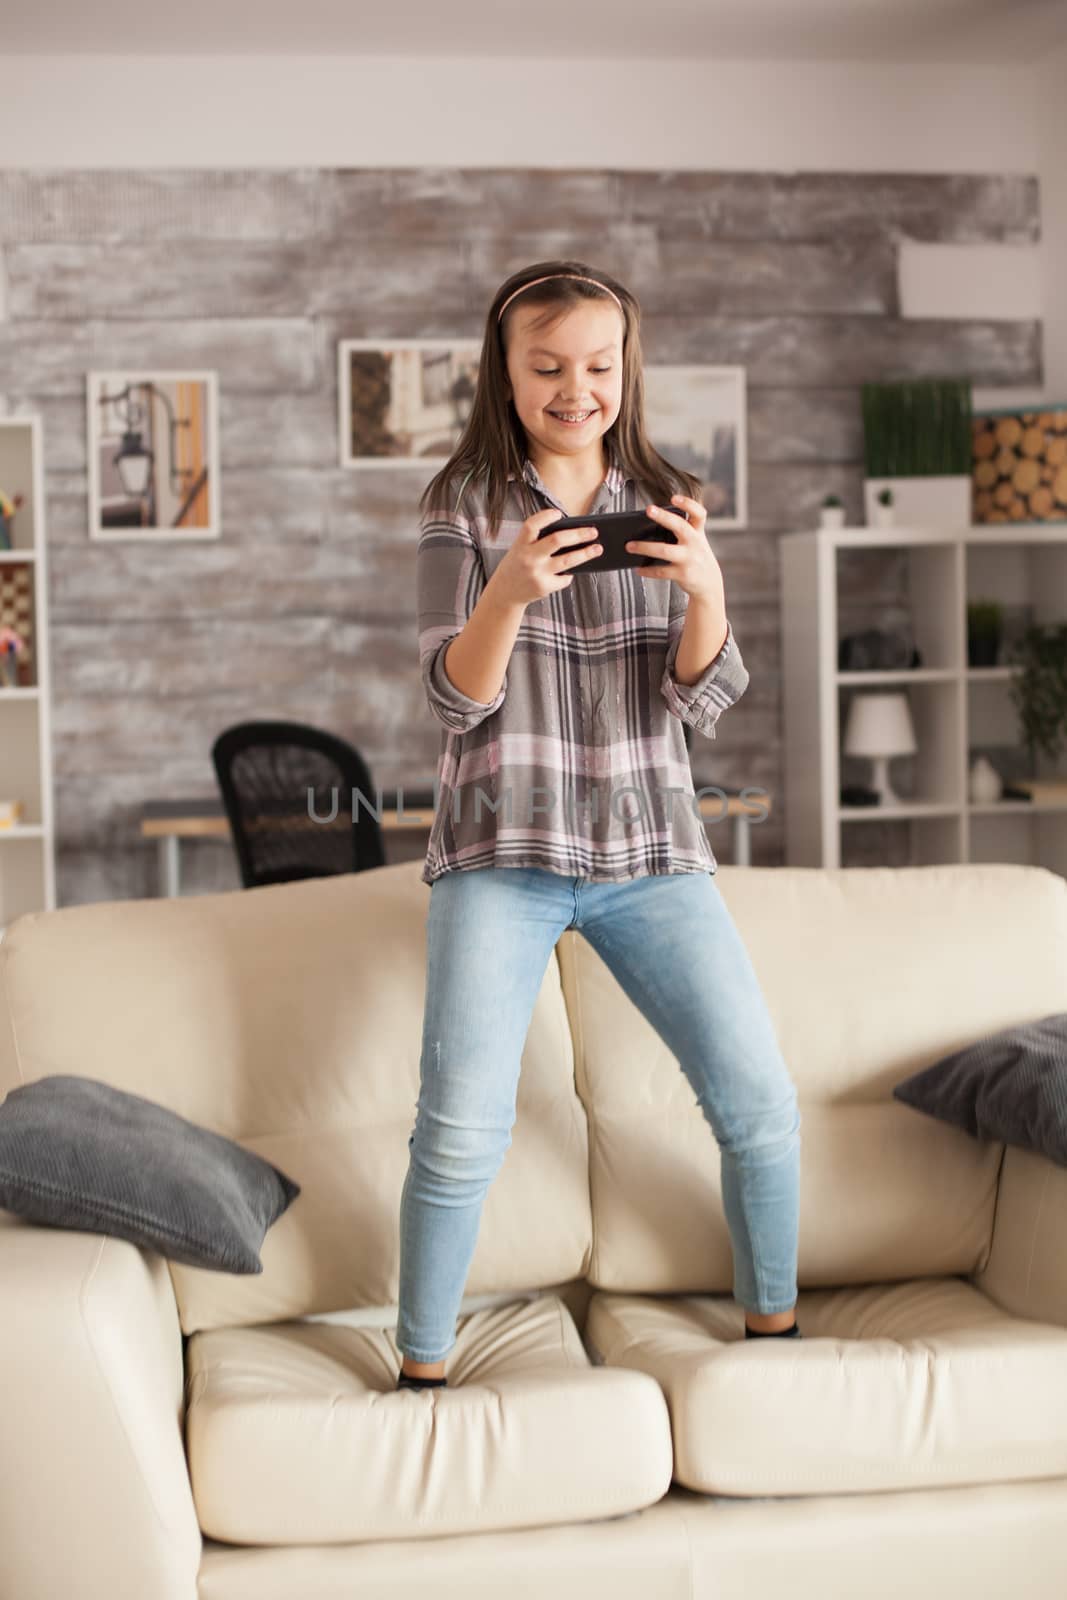 Little girl playing games on smartphones jumping on the couch in living room.